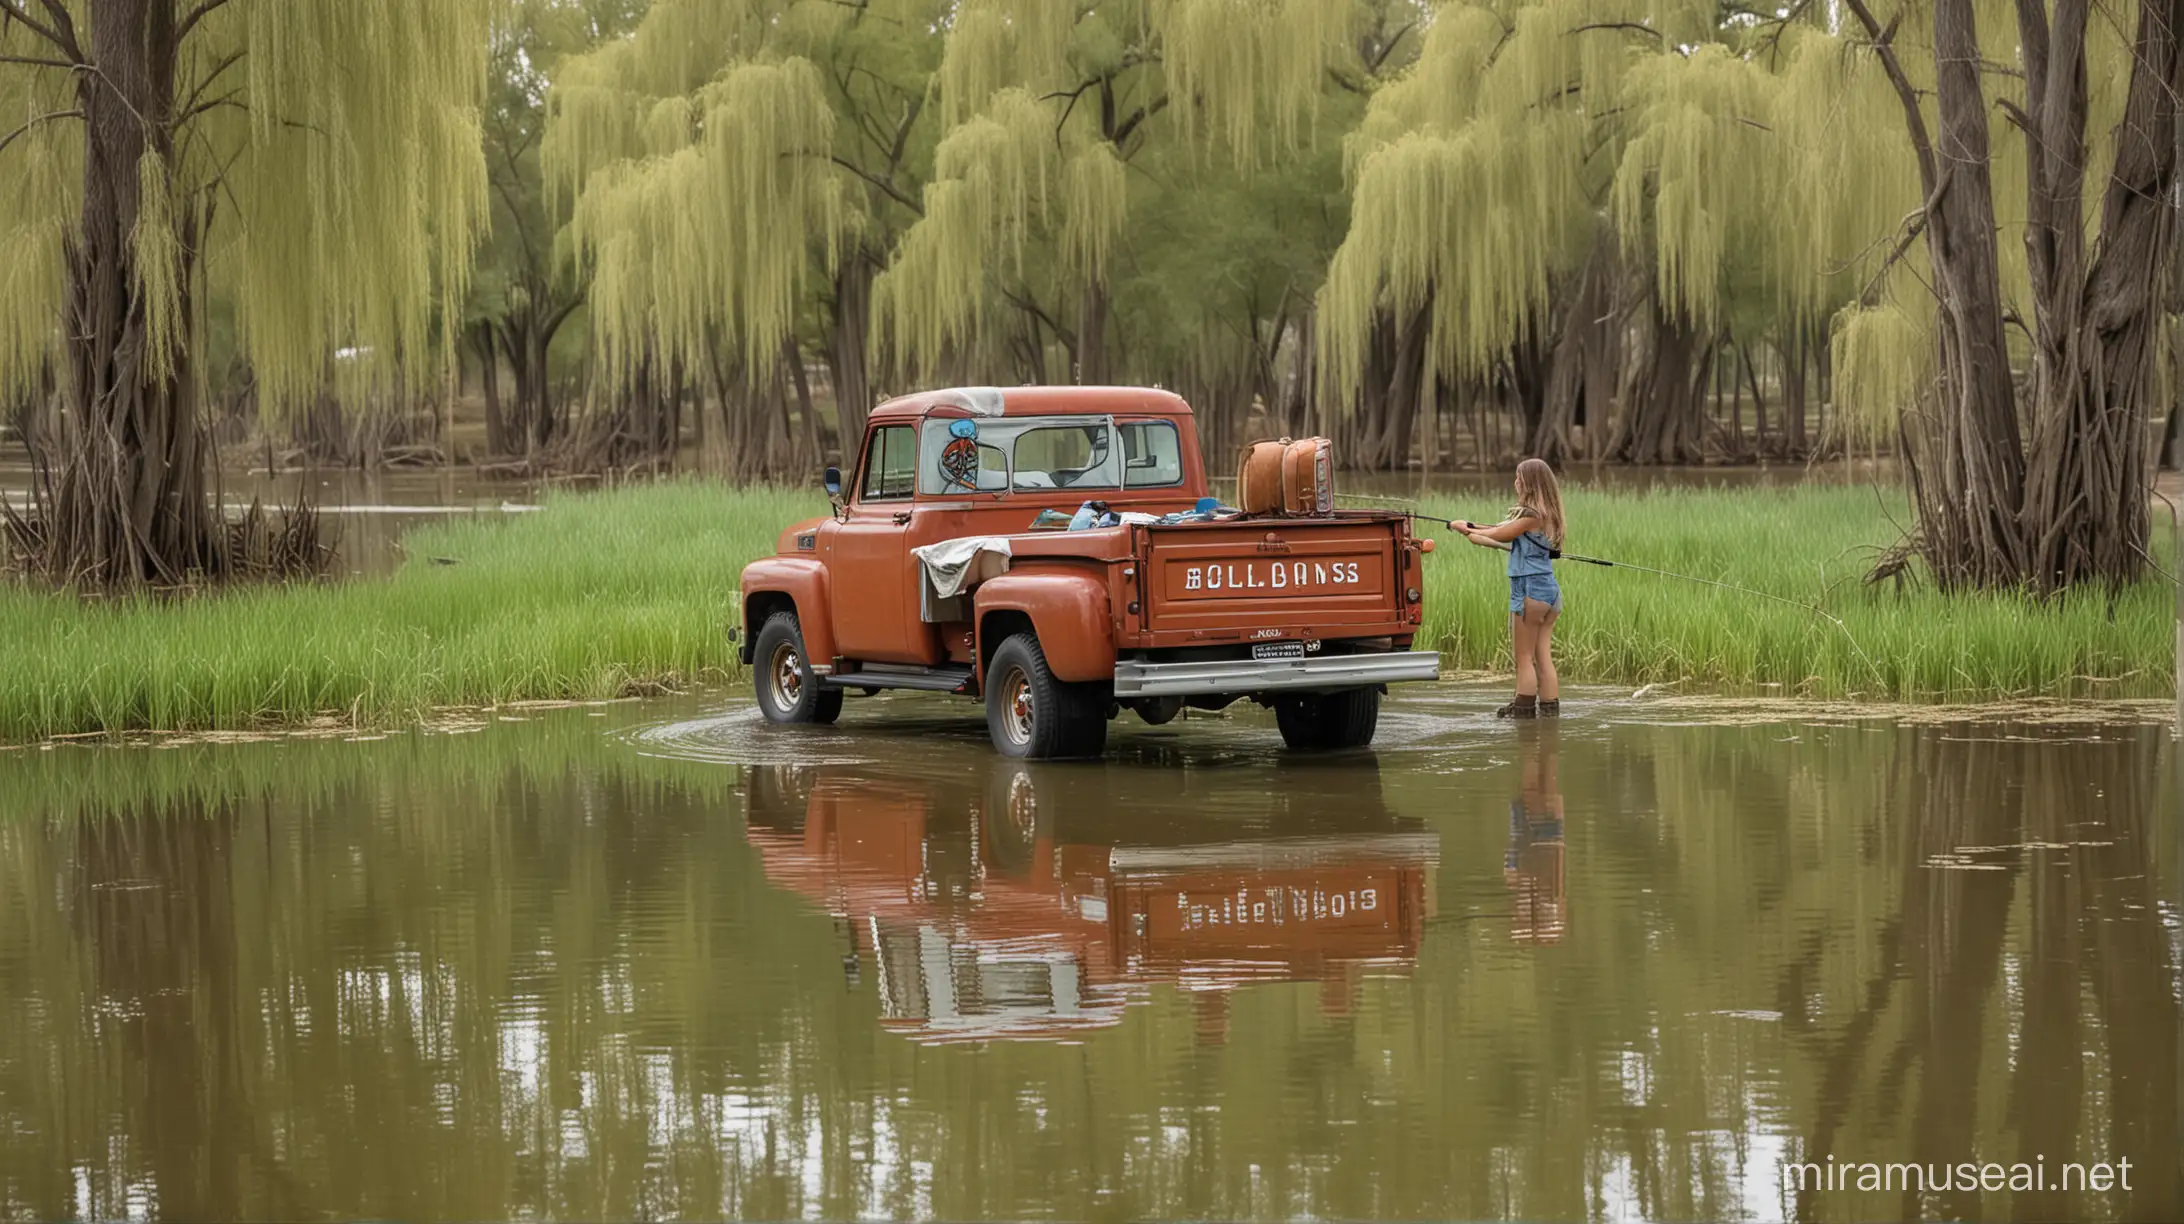 Tranquil Fishing Scene with Weeping Willows and BloodhoundPacked C10 Truck